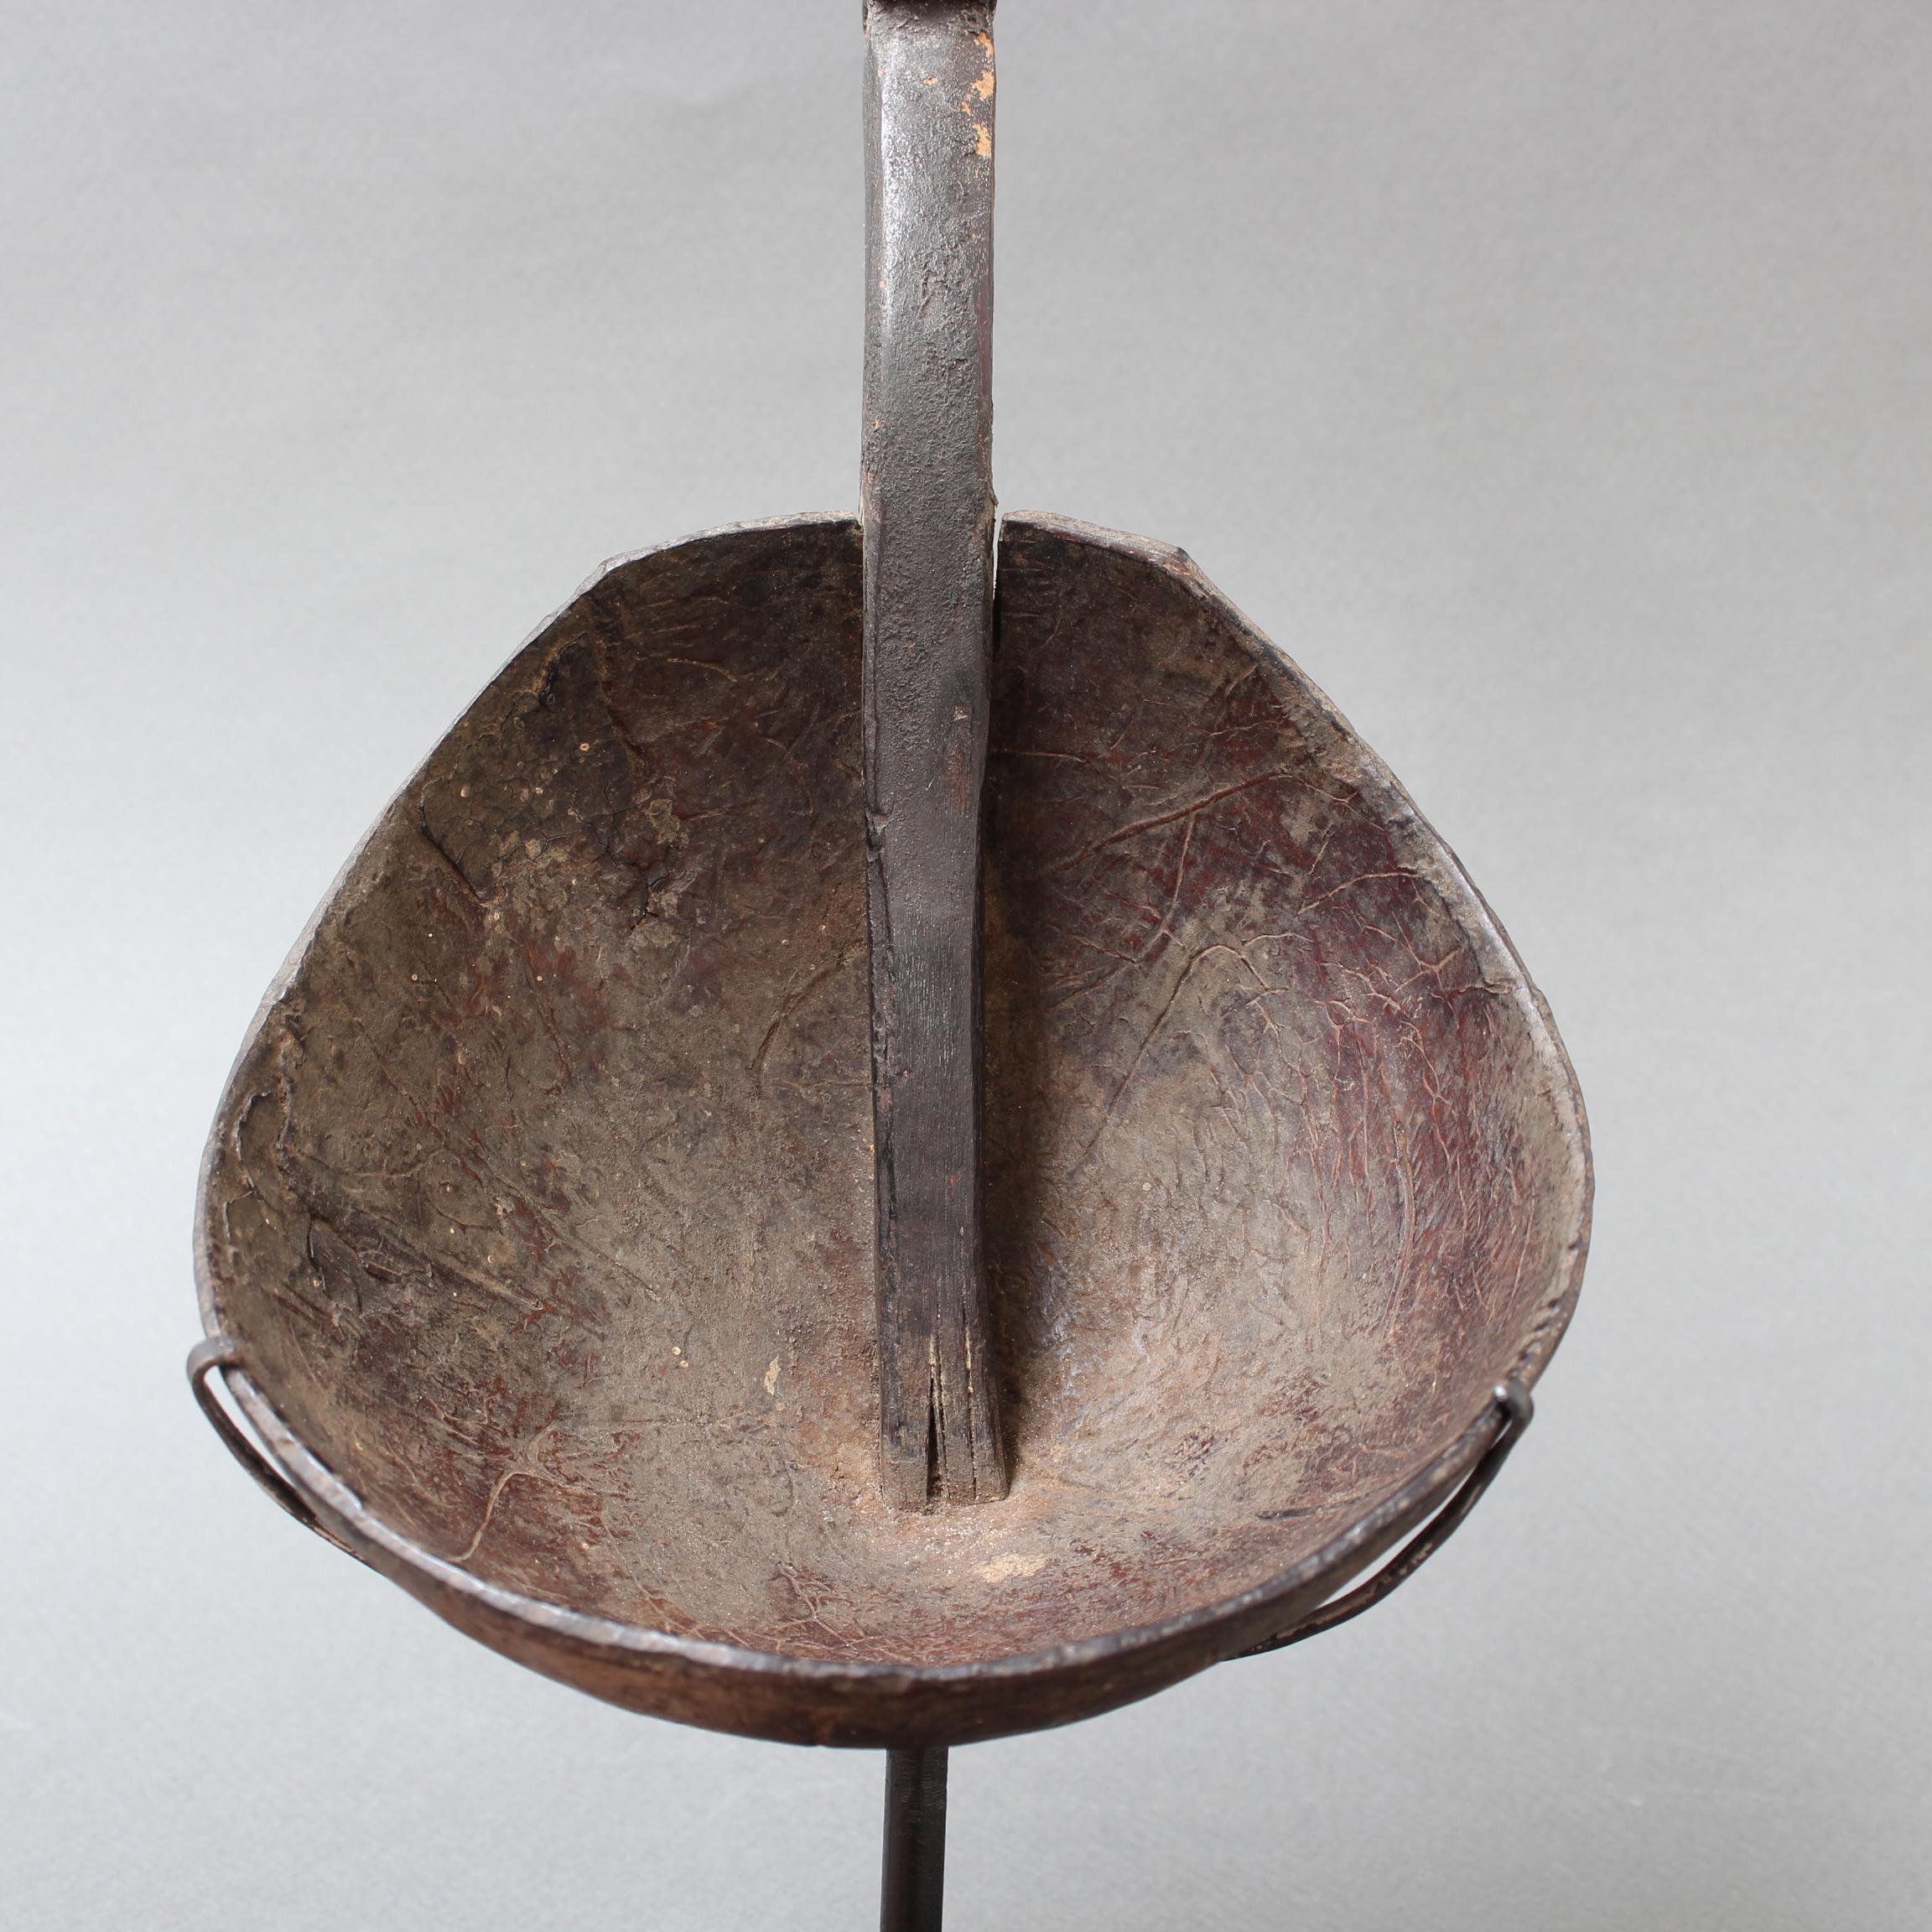 Ritual Ladle of Wood and Coconut Shell from Timor Island, Indonesia, circa 1950s For Sale 9